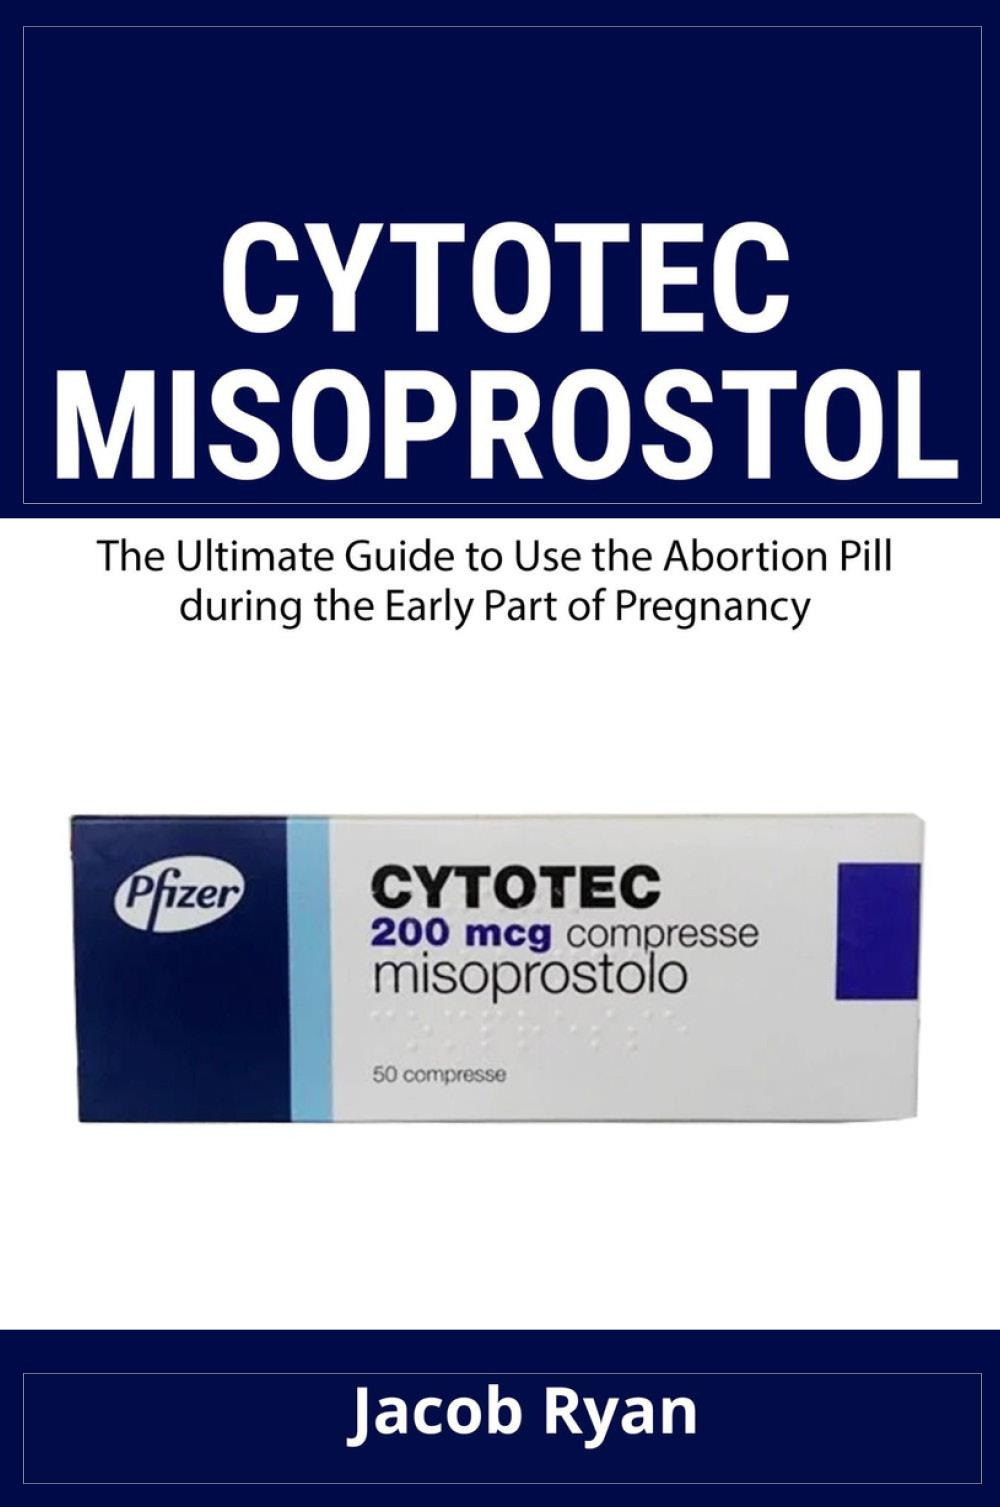 Cytotec misoprostol. The ultimate guide to use the abortion pill during the early part of pregnancy